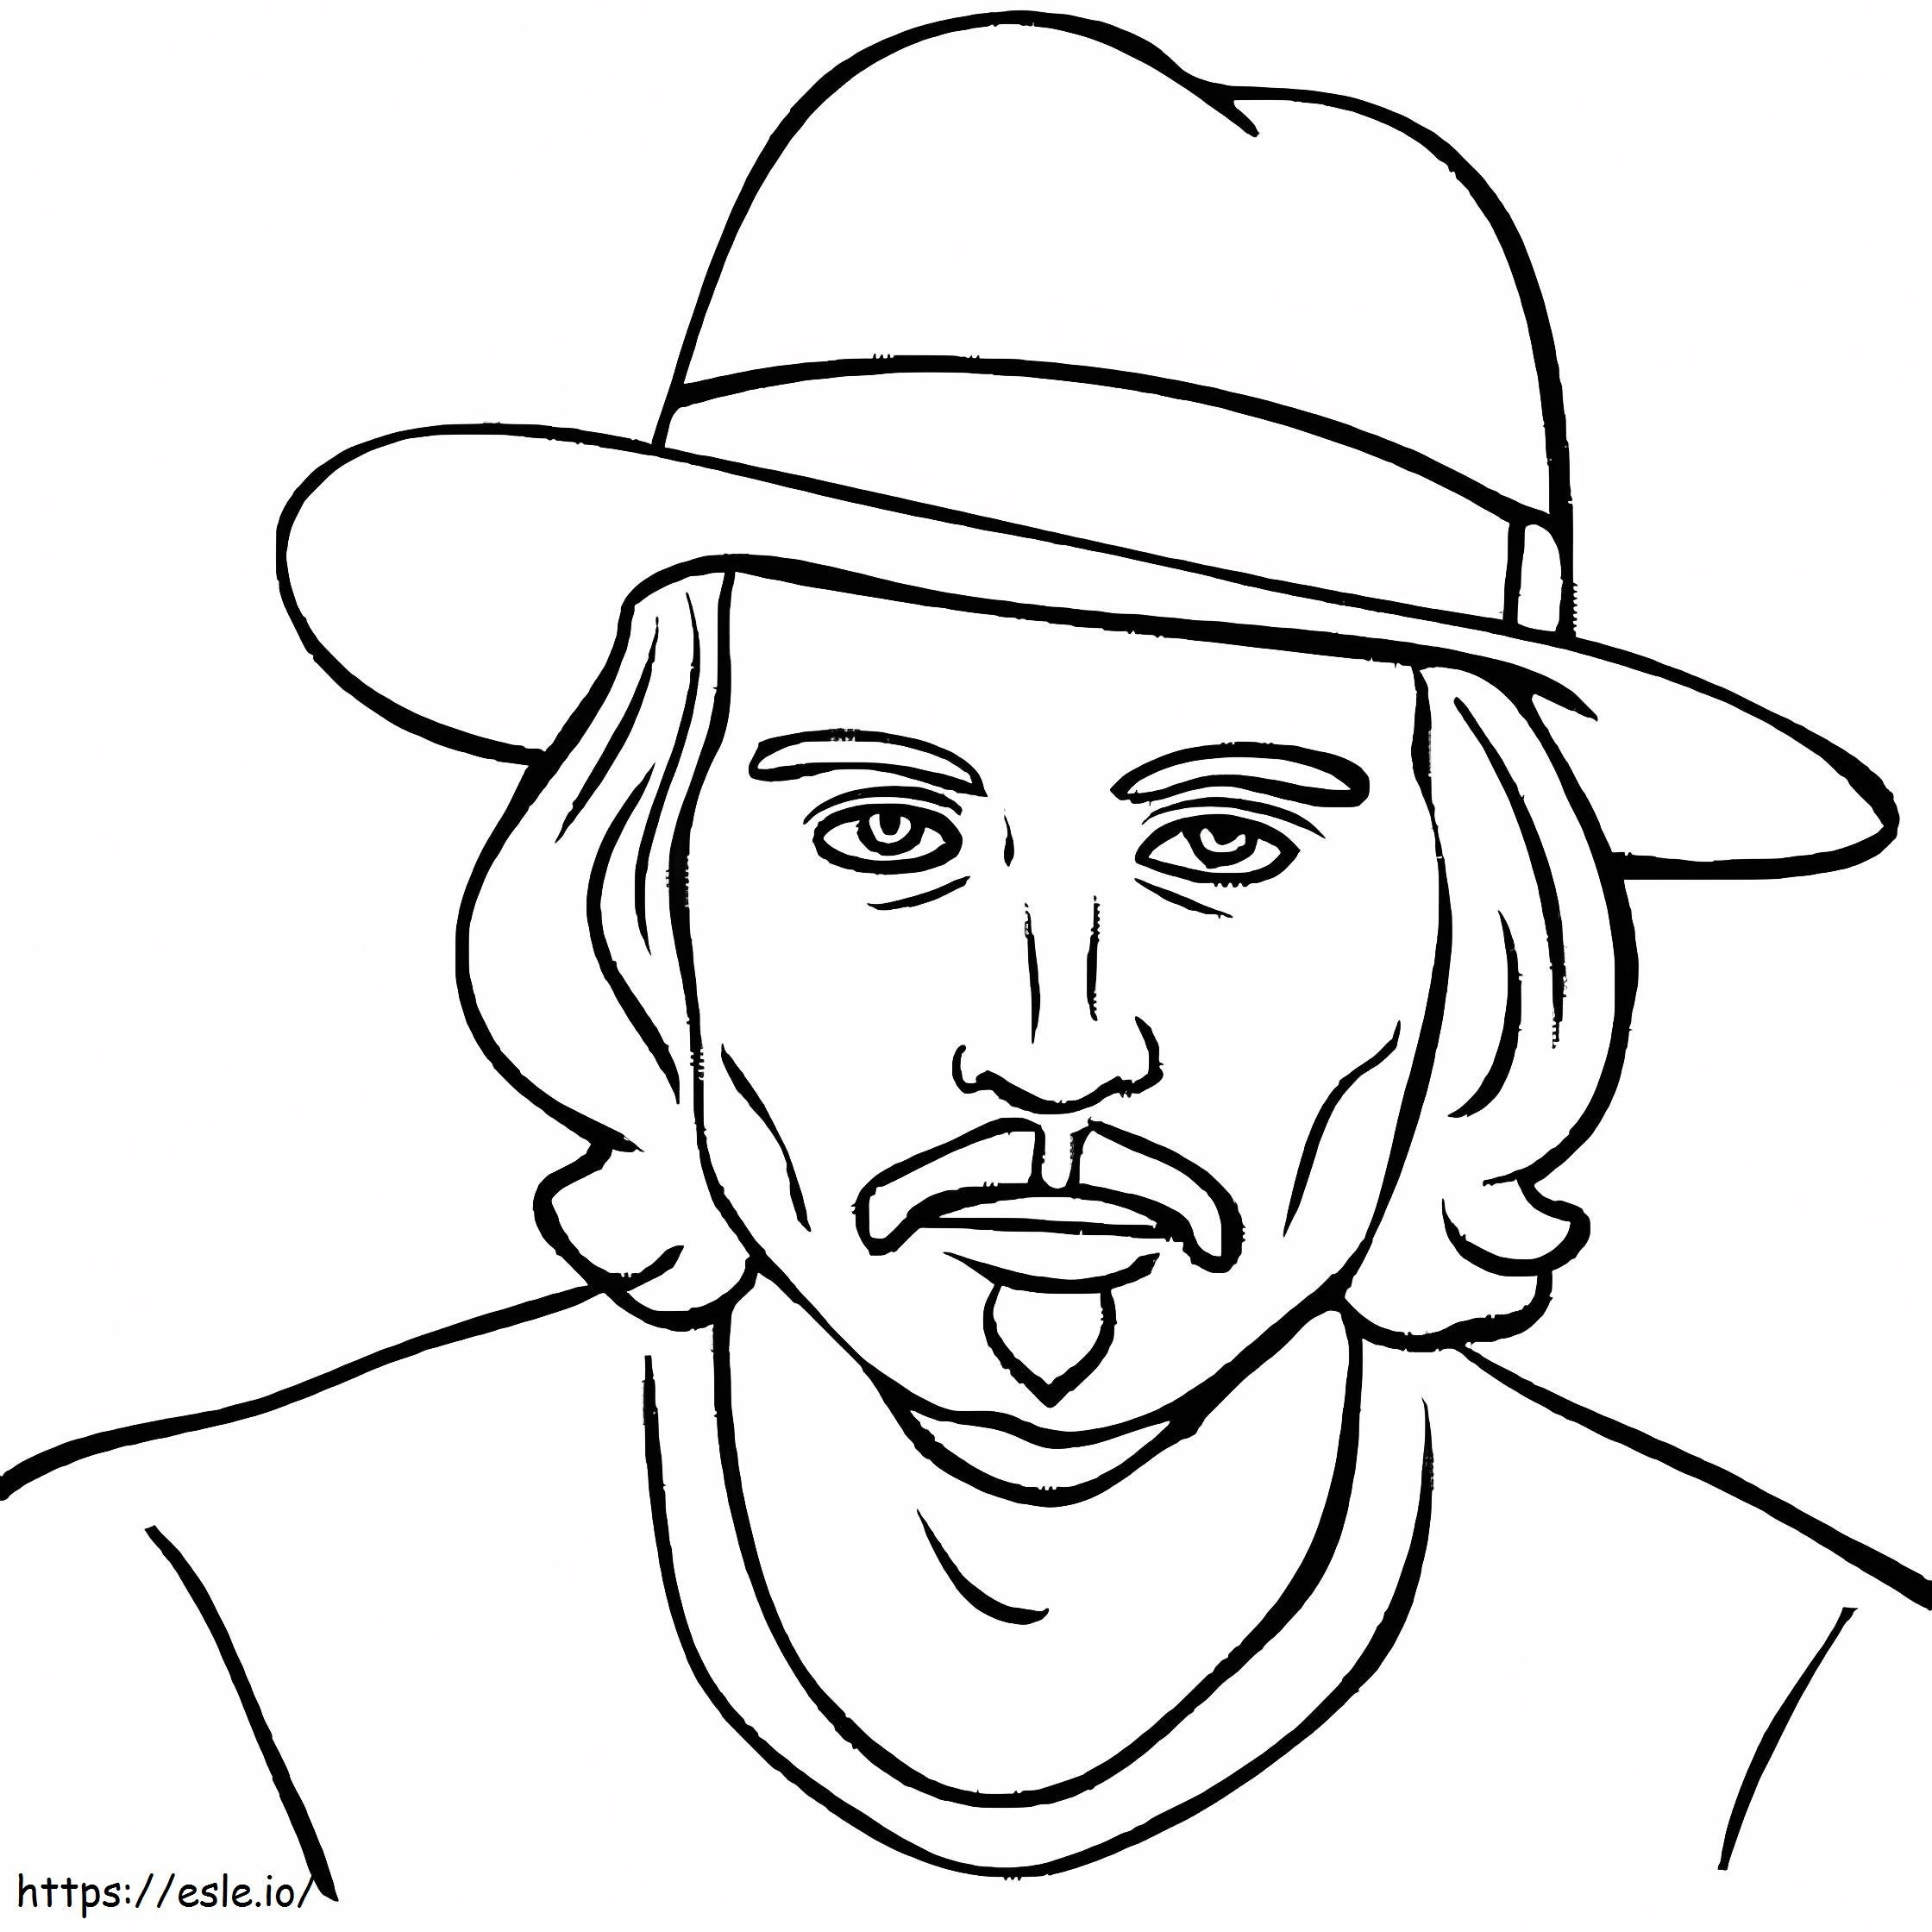 Printable Johnny Depp coloring page